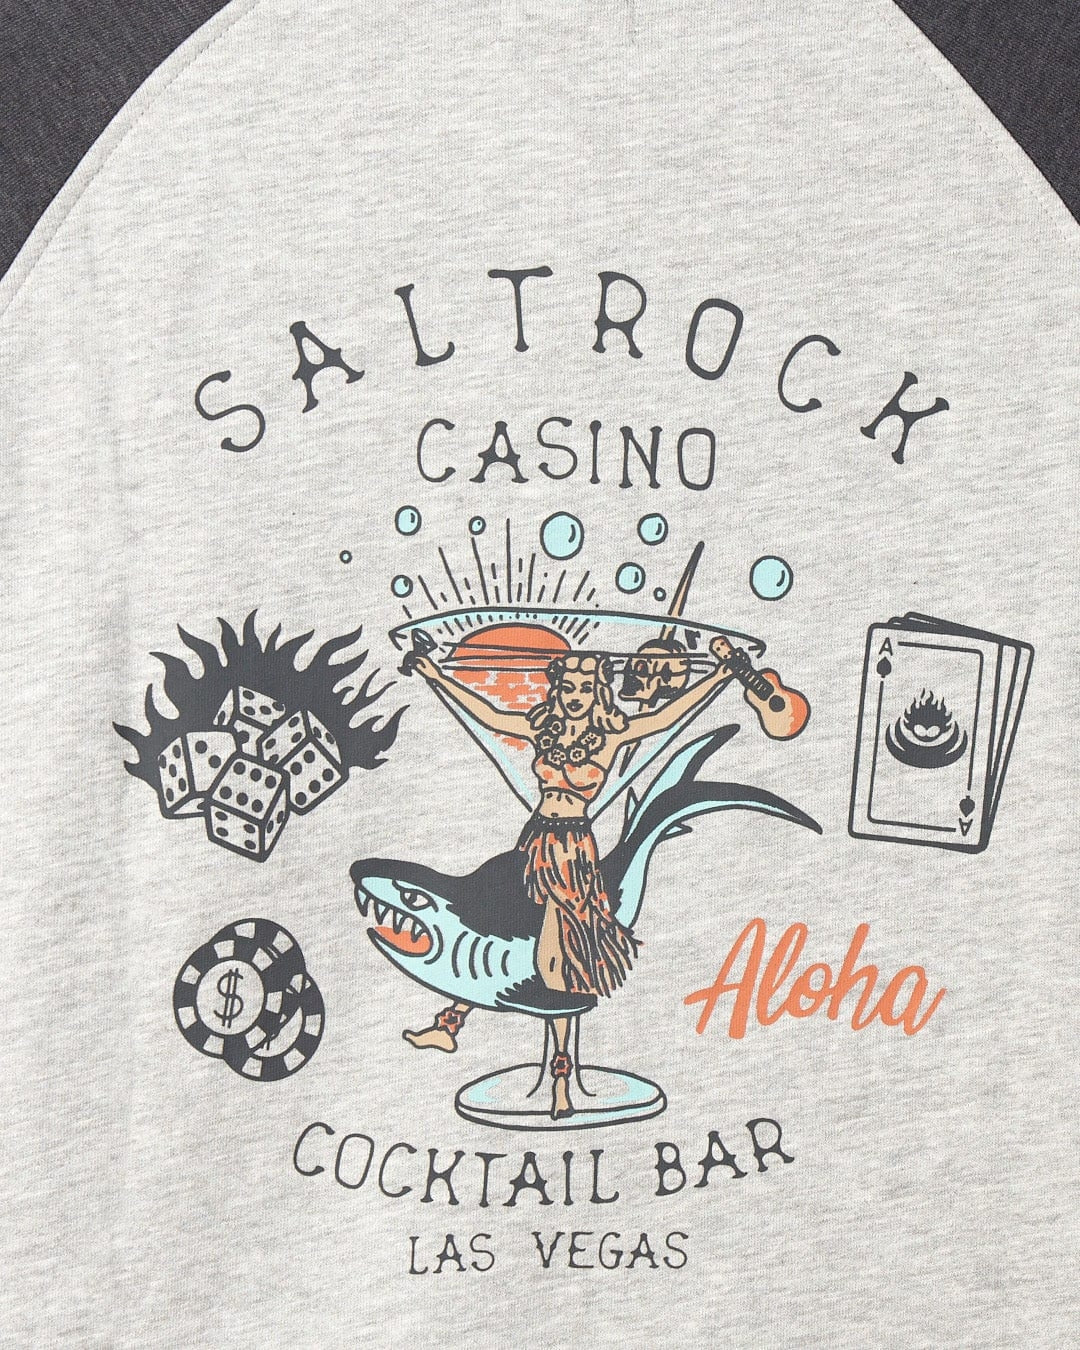 Men's Saltrock raglan zip hoodie with Vegas Cocktail Casino print on the back featuring a cocktail glass, shark and Hula girl.